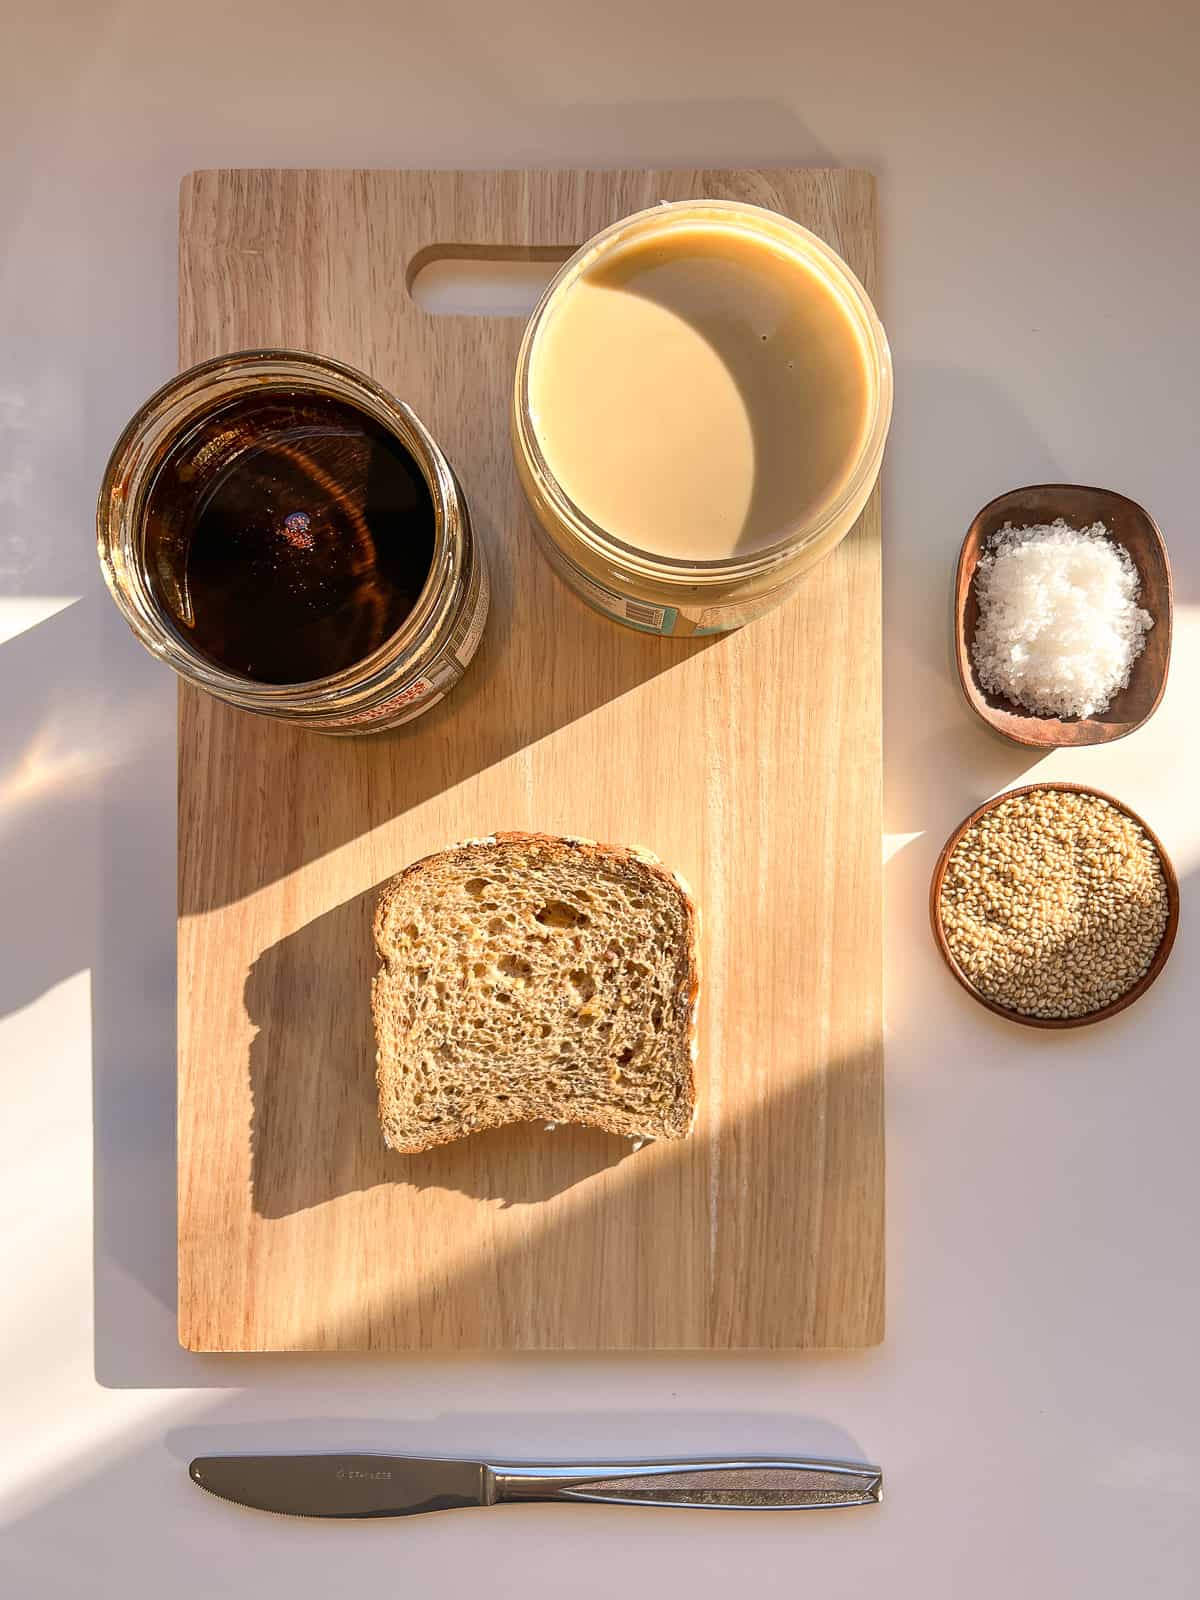 An image showing the ingredients needed to make date and sesame crunch toast.